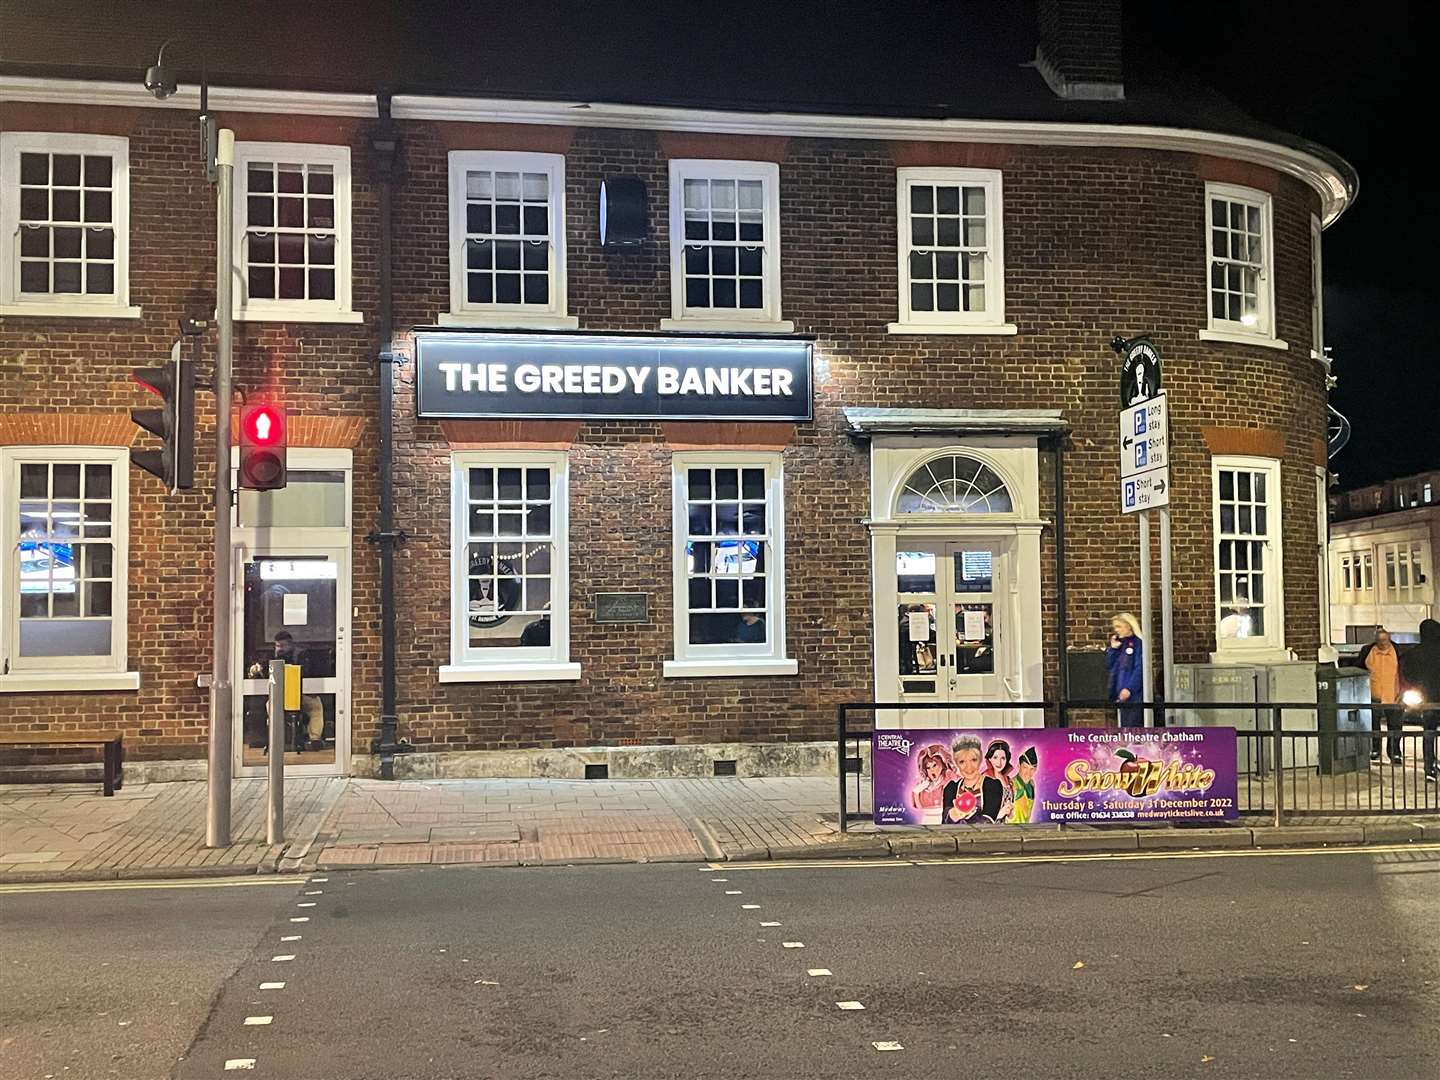 The pair already run two successful eateries including The Greedy Banker in Rainham